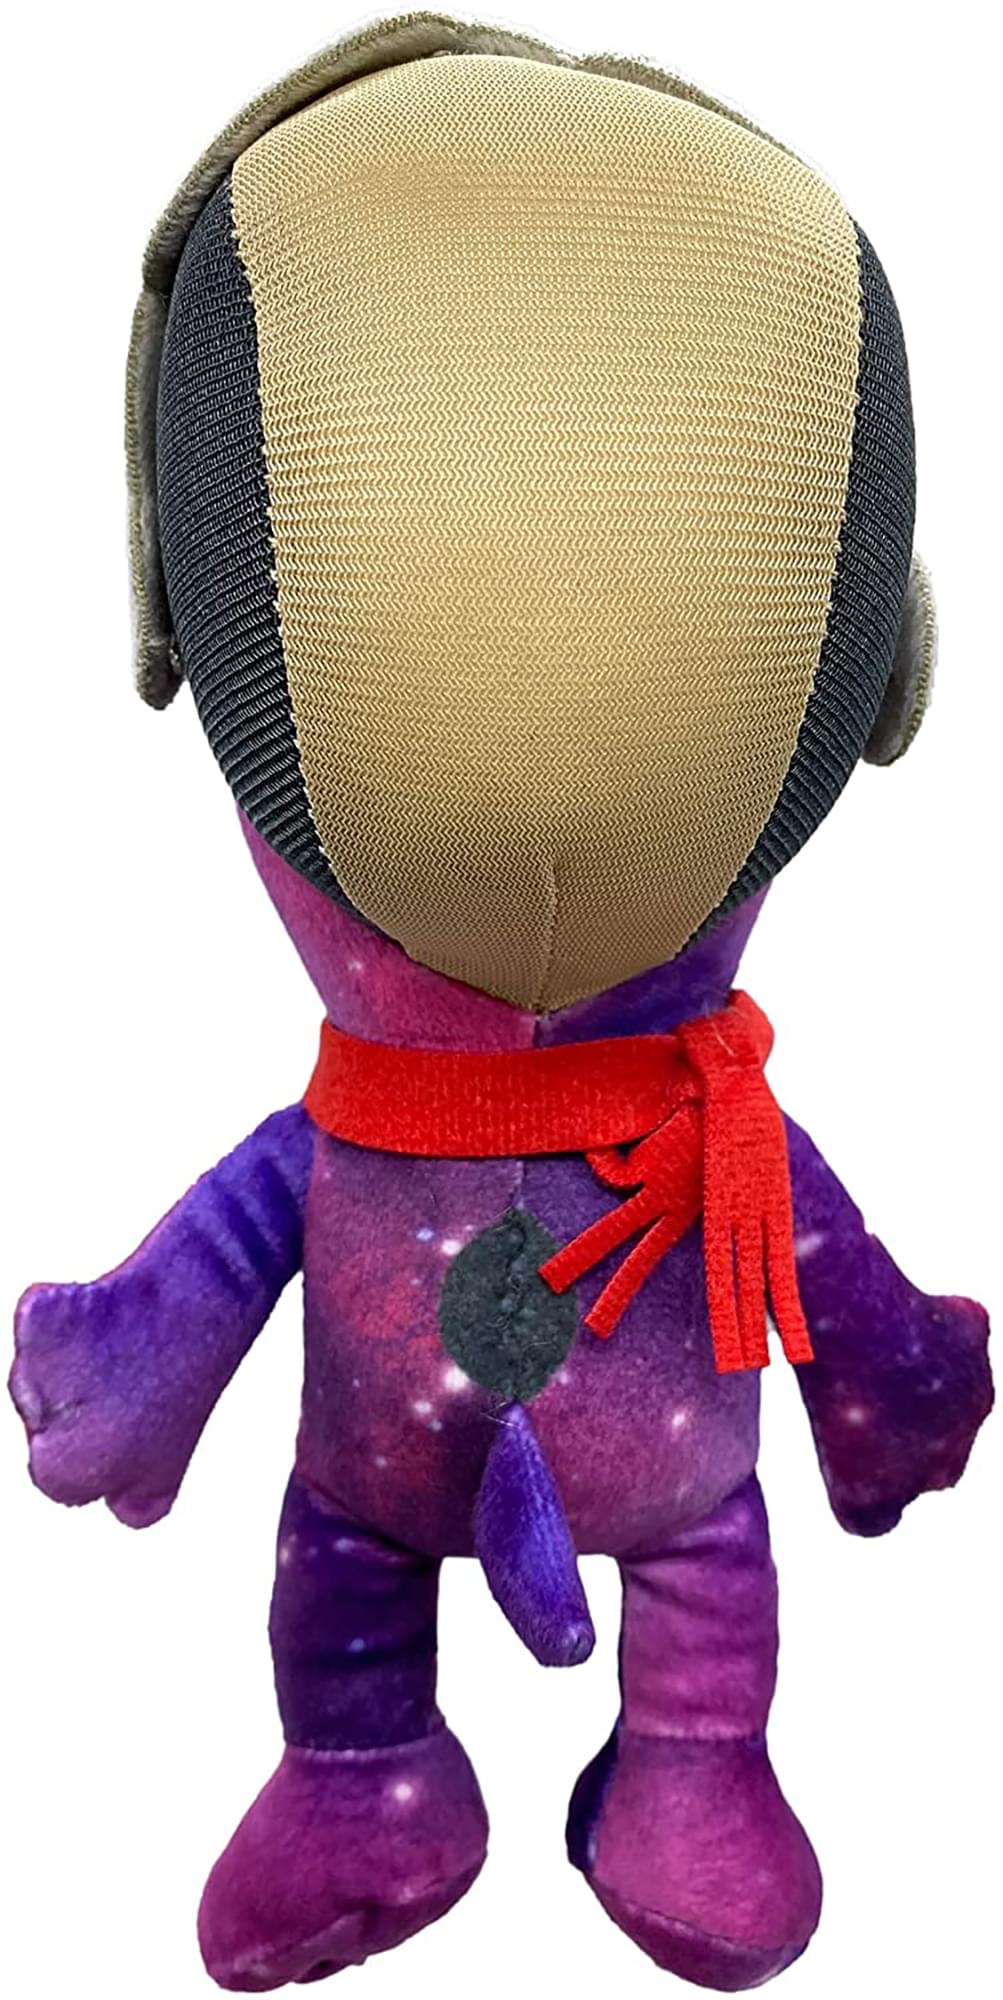 Snoopy in Space 7.5 Inch Plush | Snoopy Nebula